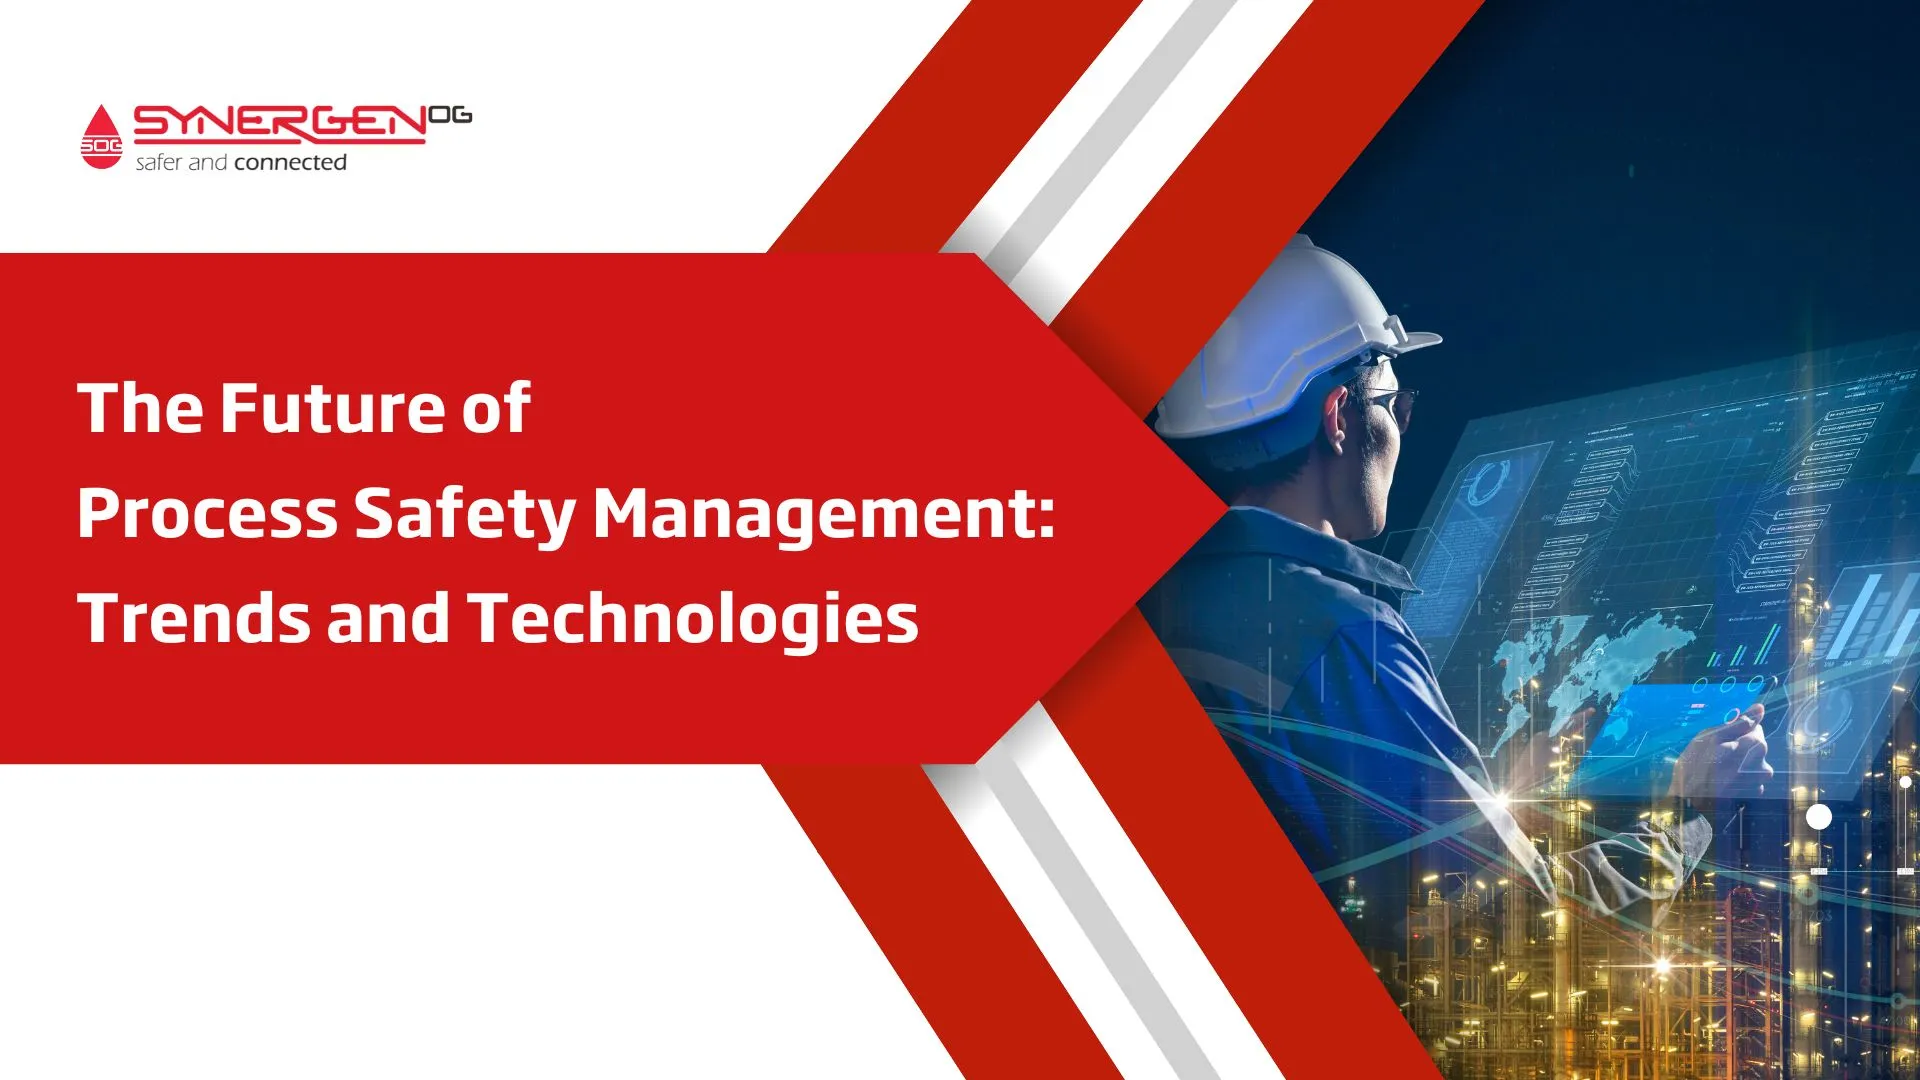 future of process safety management ppt, future of process safety management pdf